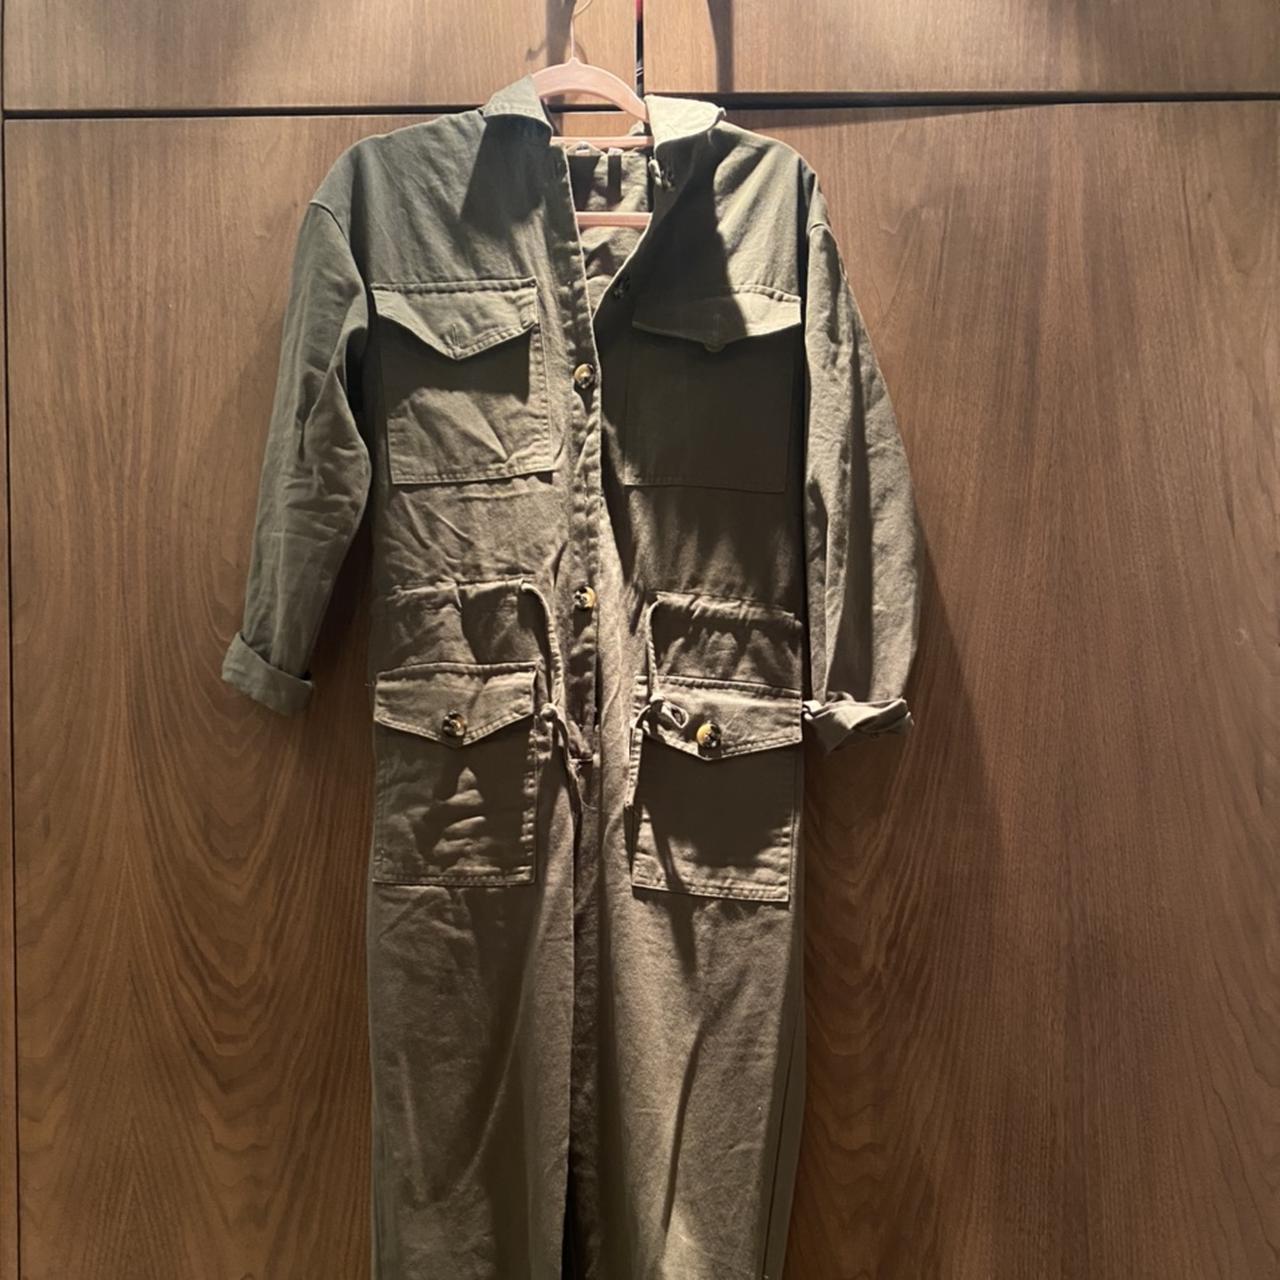 KHARKY BOILER SUIT. Perfect with sneakers or cute... - Depop